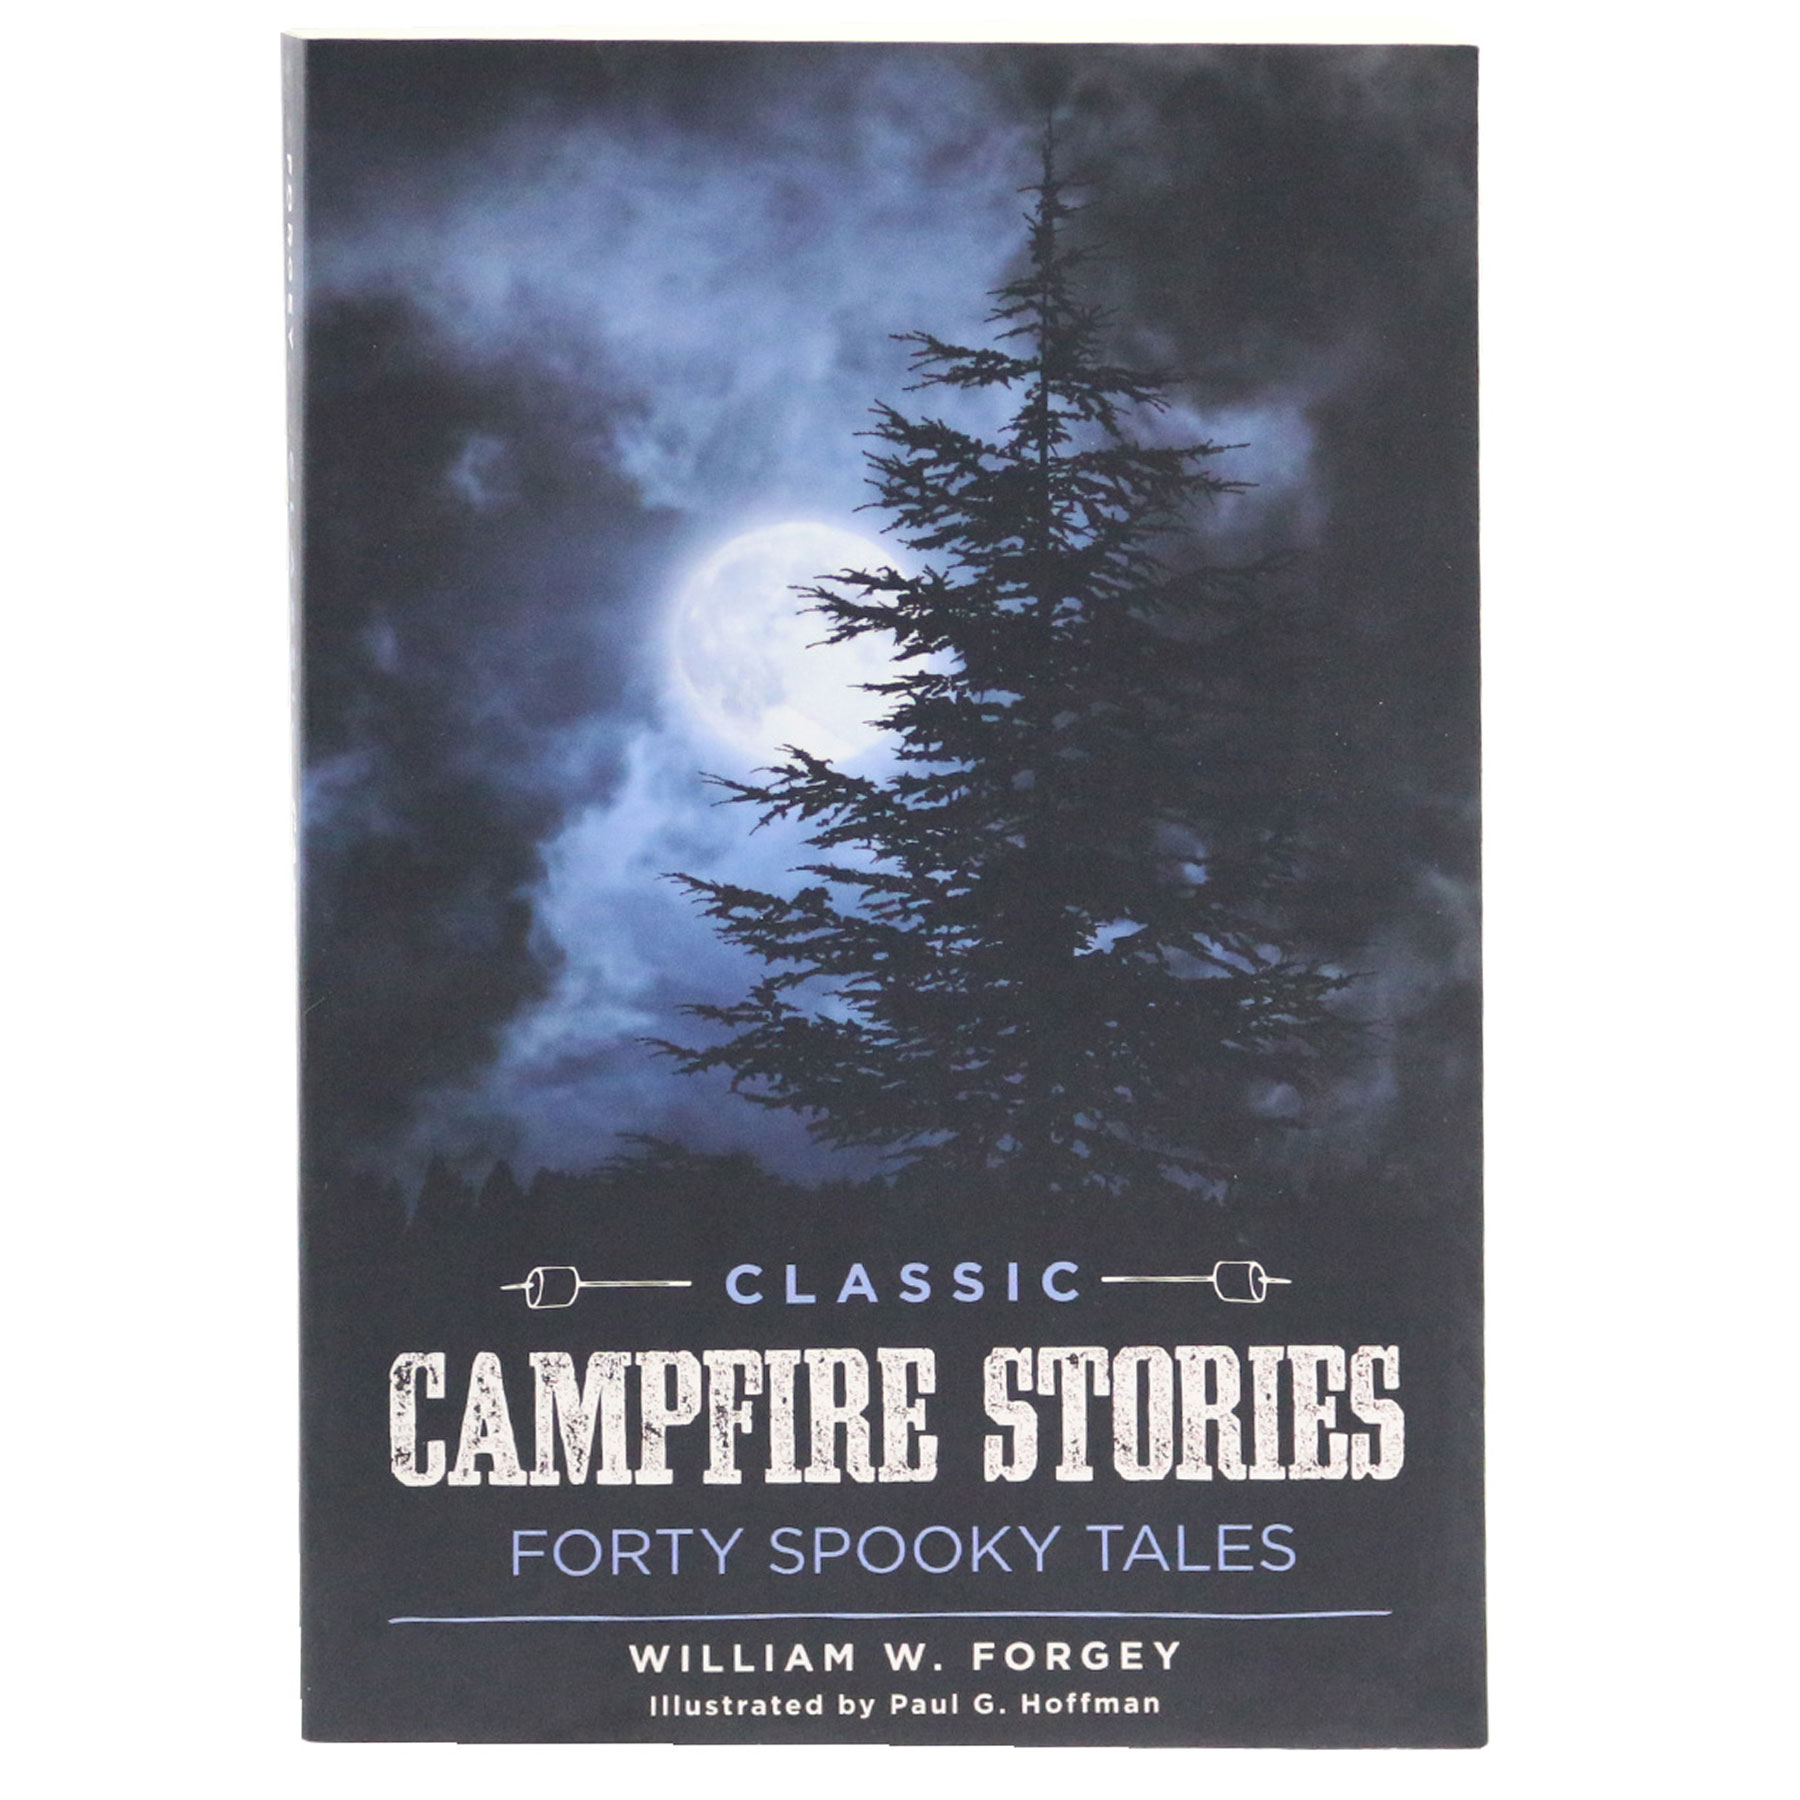 CLASSIC CAMPFIRE STORIES